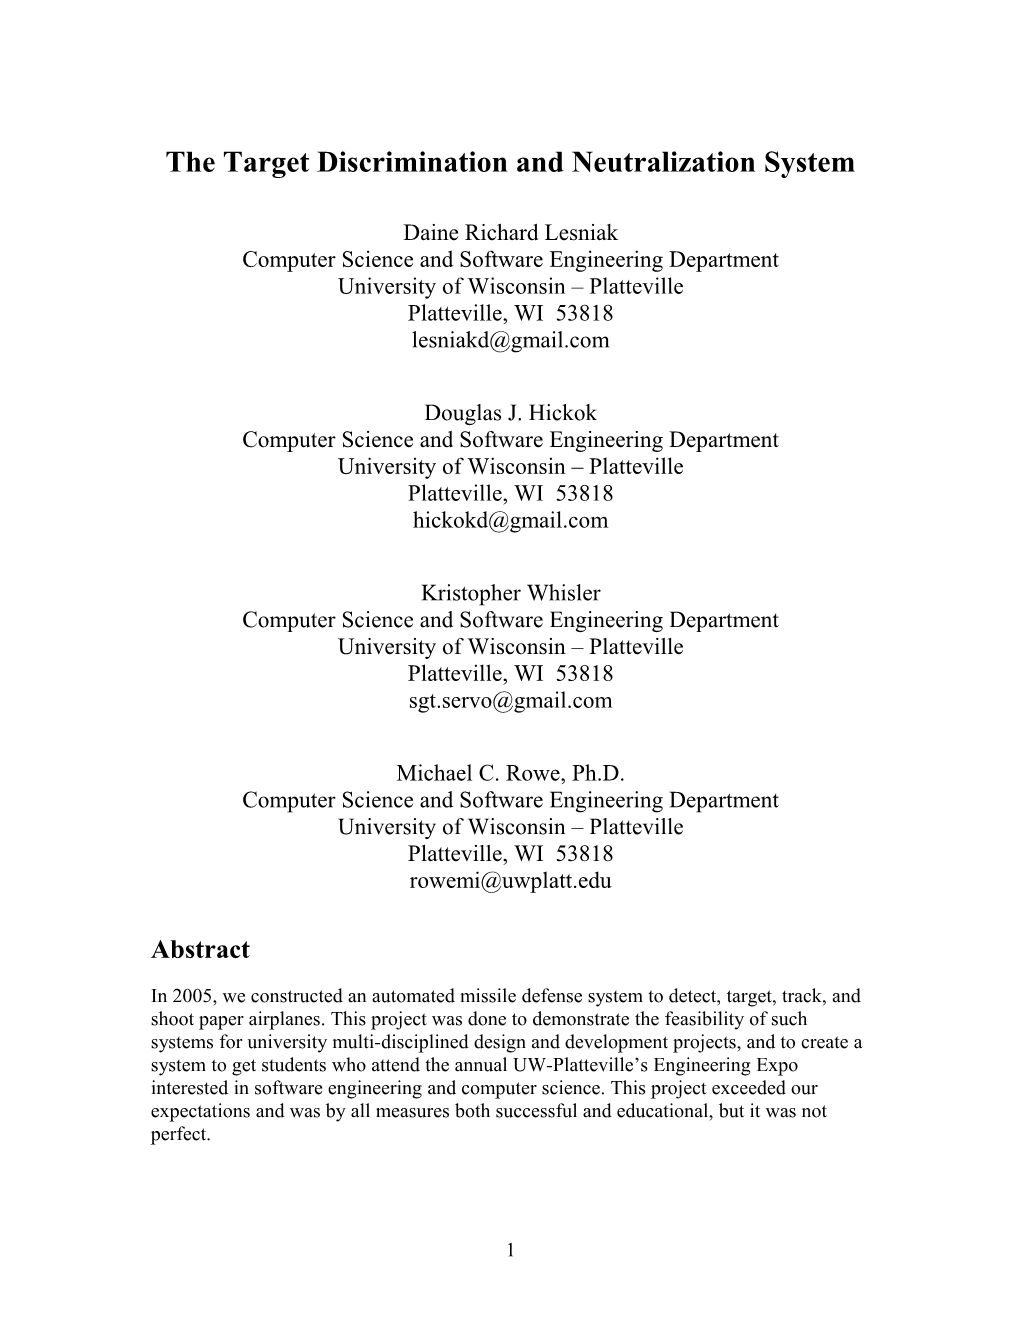 The Target Discrimination and Neutralization System